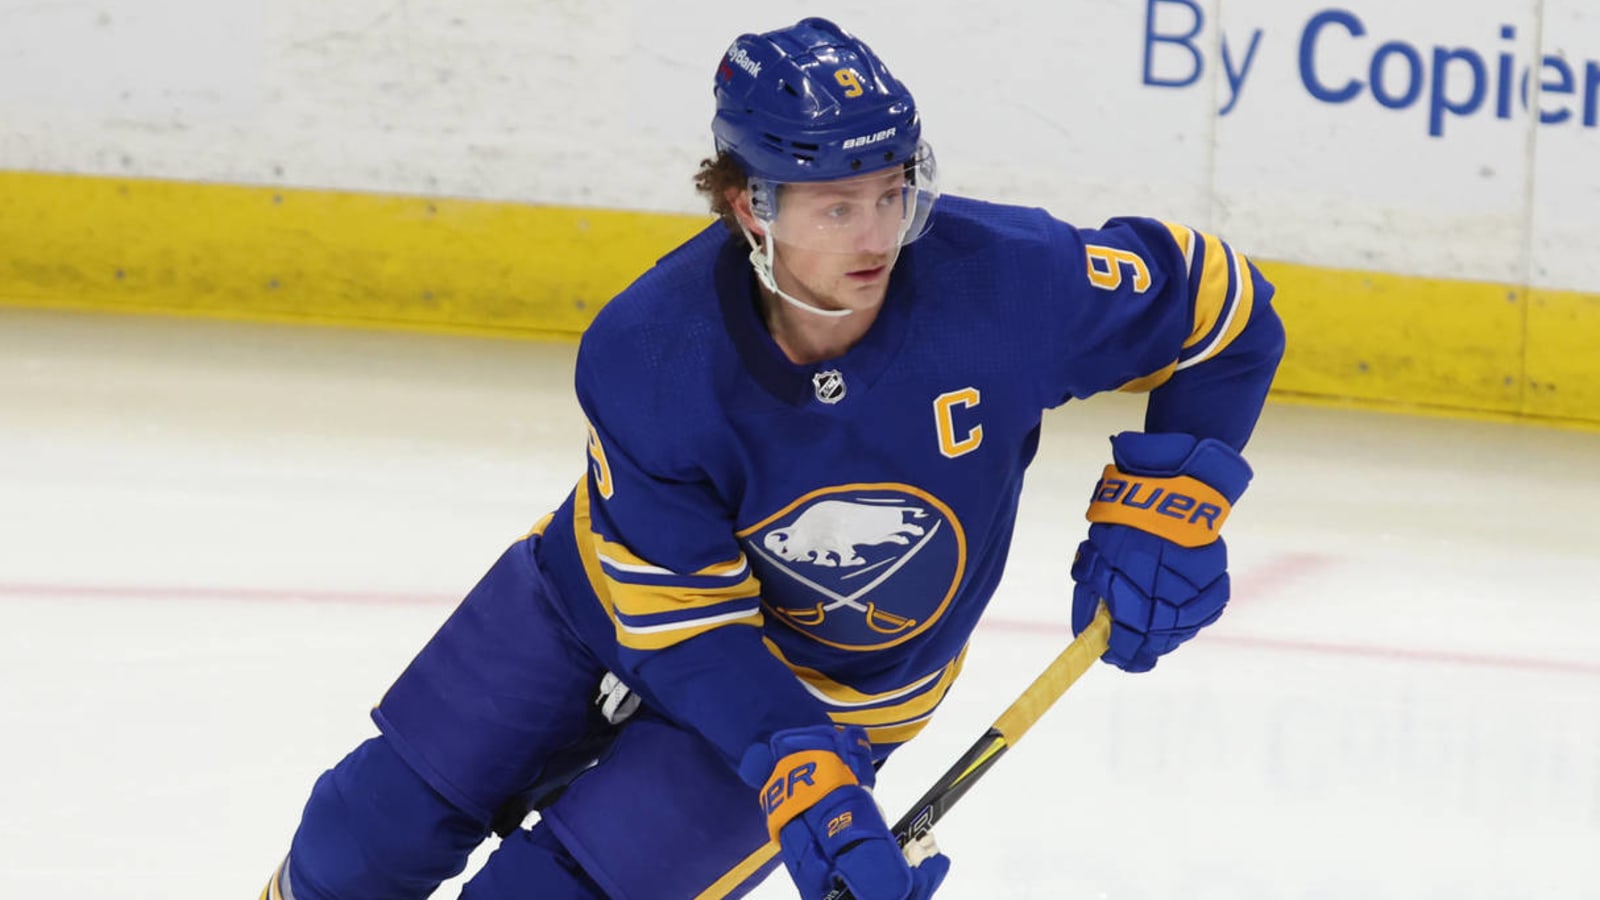 Rangers reportedly had preliminary trade talks for Eichel